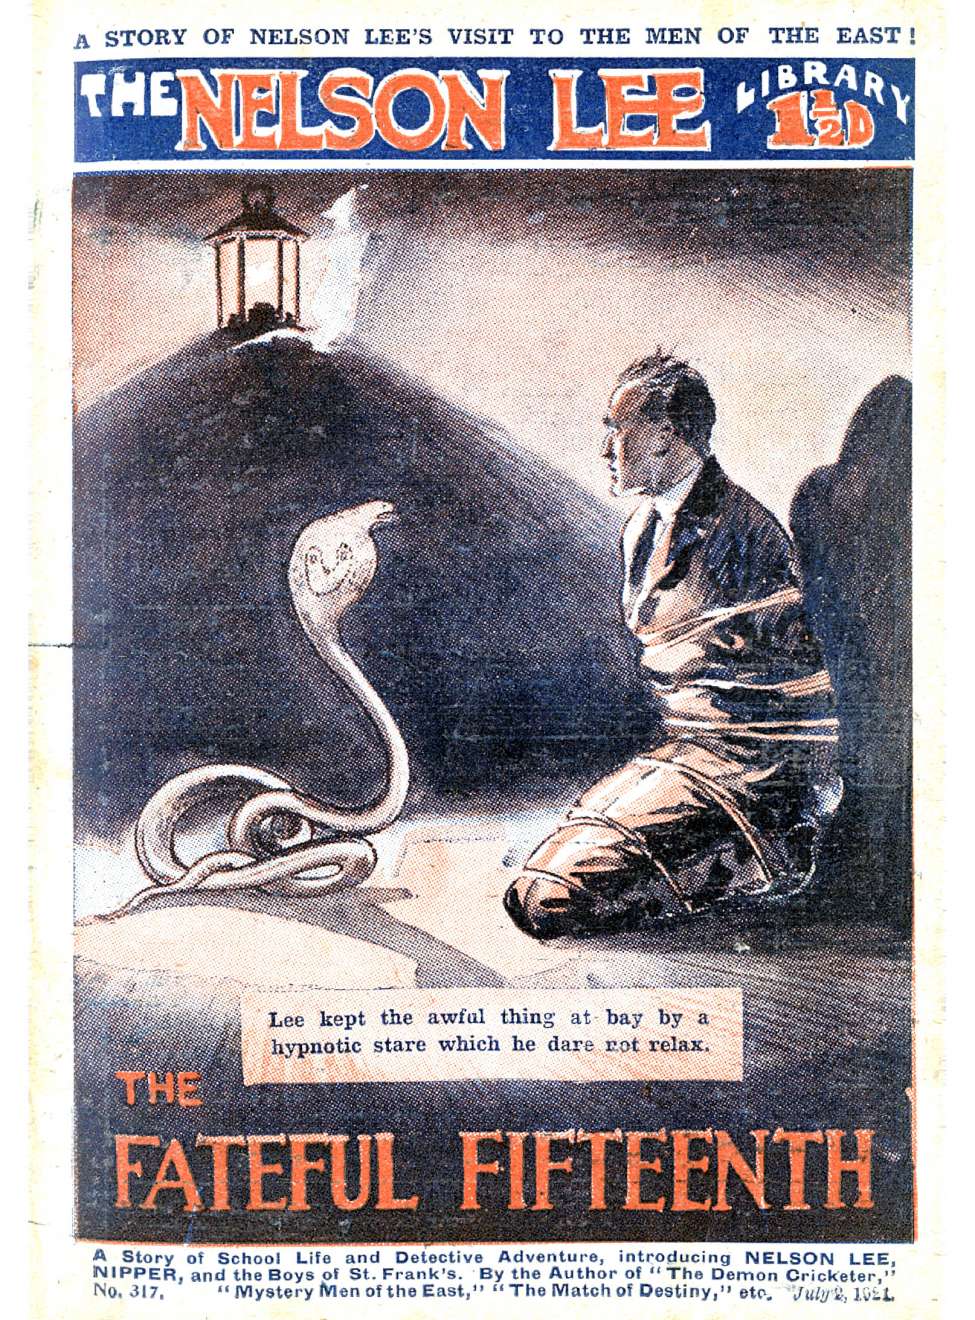 Comic Book Cover For Nelson Lee Library s1 317 - The Fateful Fifteenth